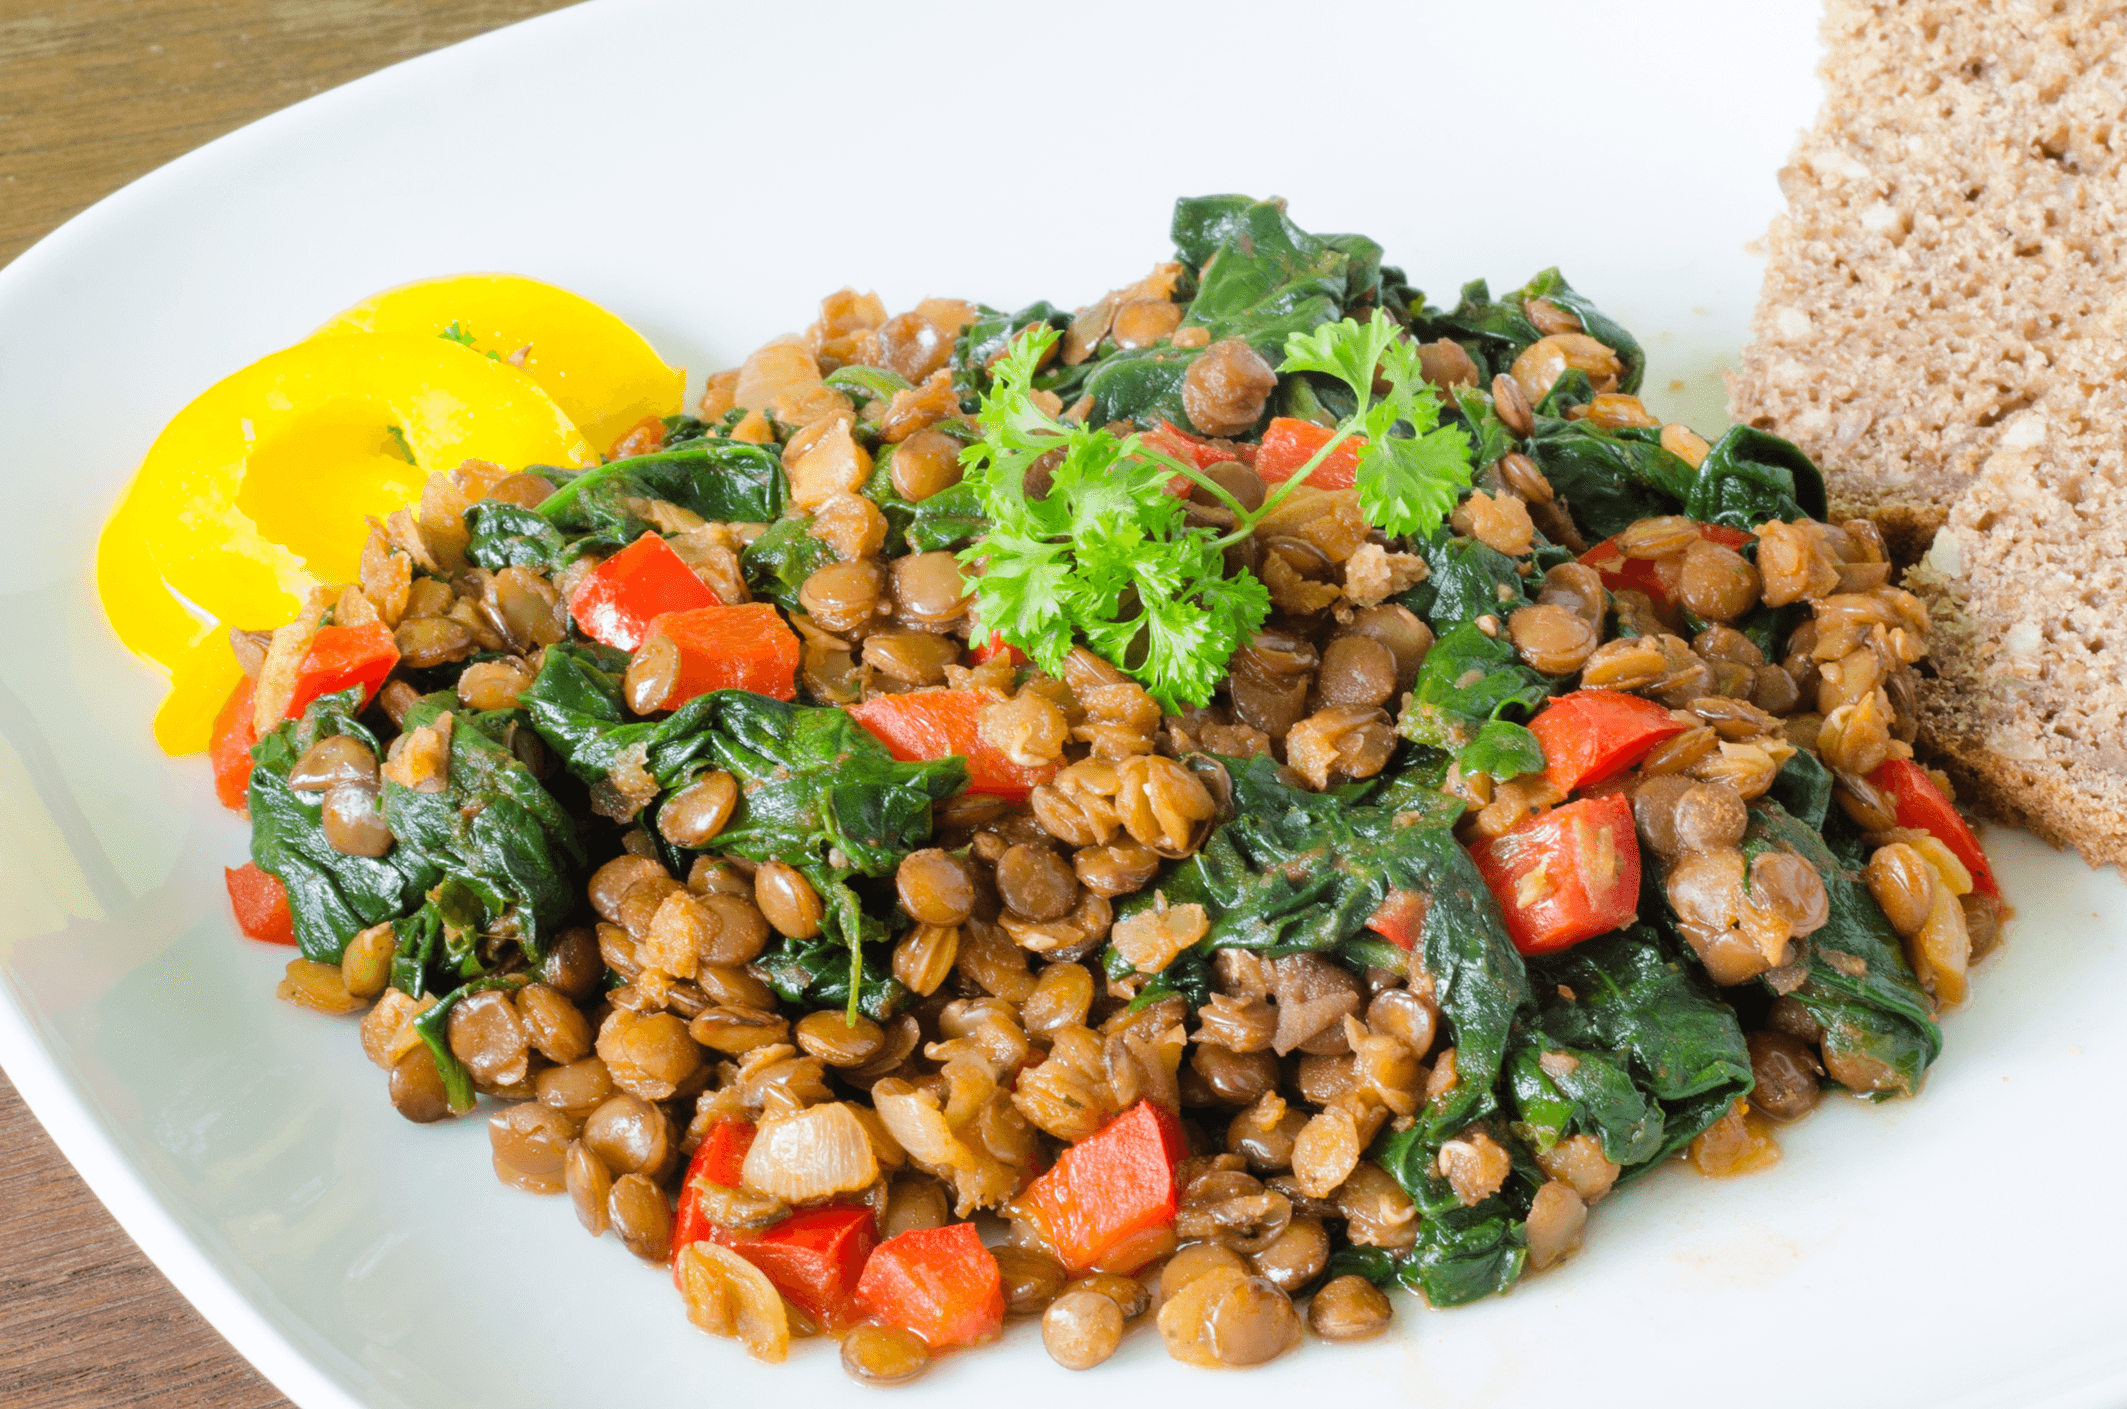 Lemony Lentils with Tomatoes, Kale/Spinach and Coriander